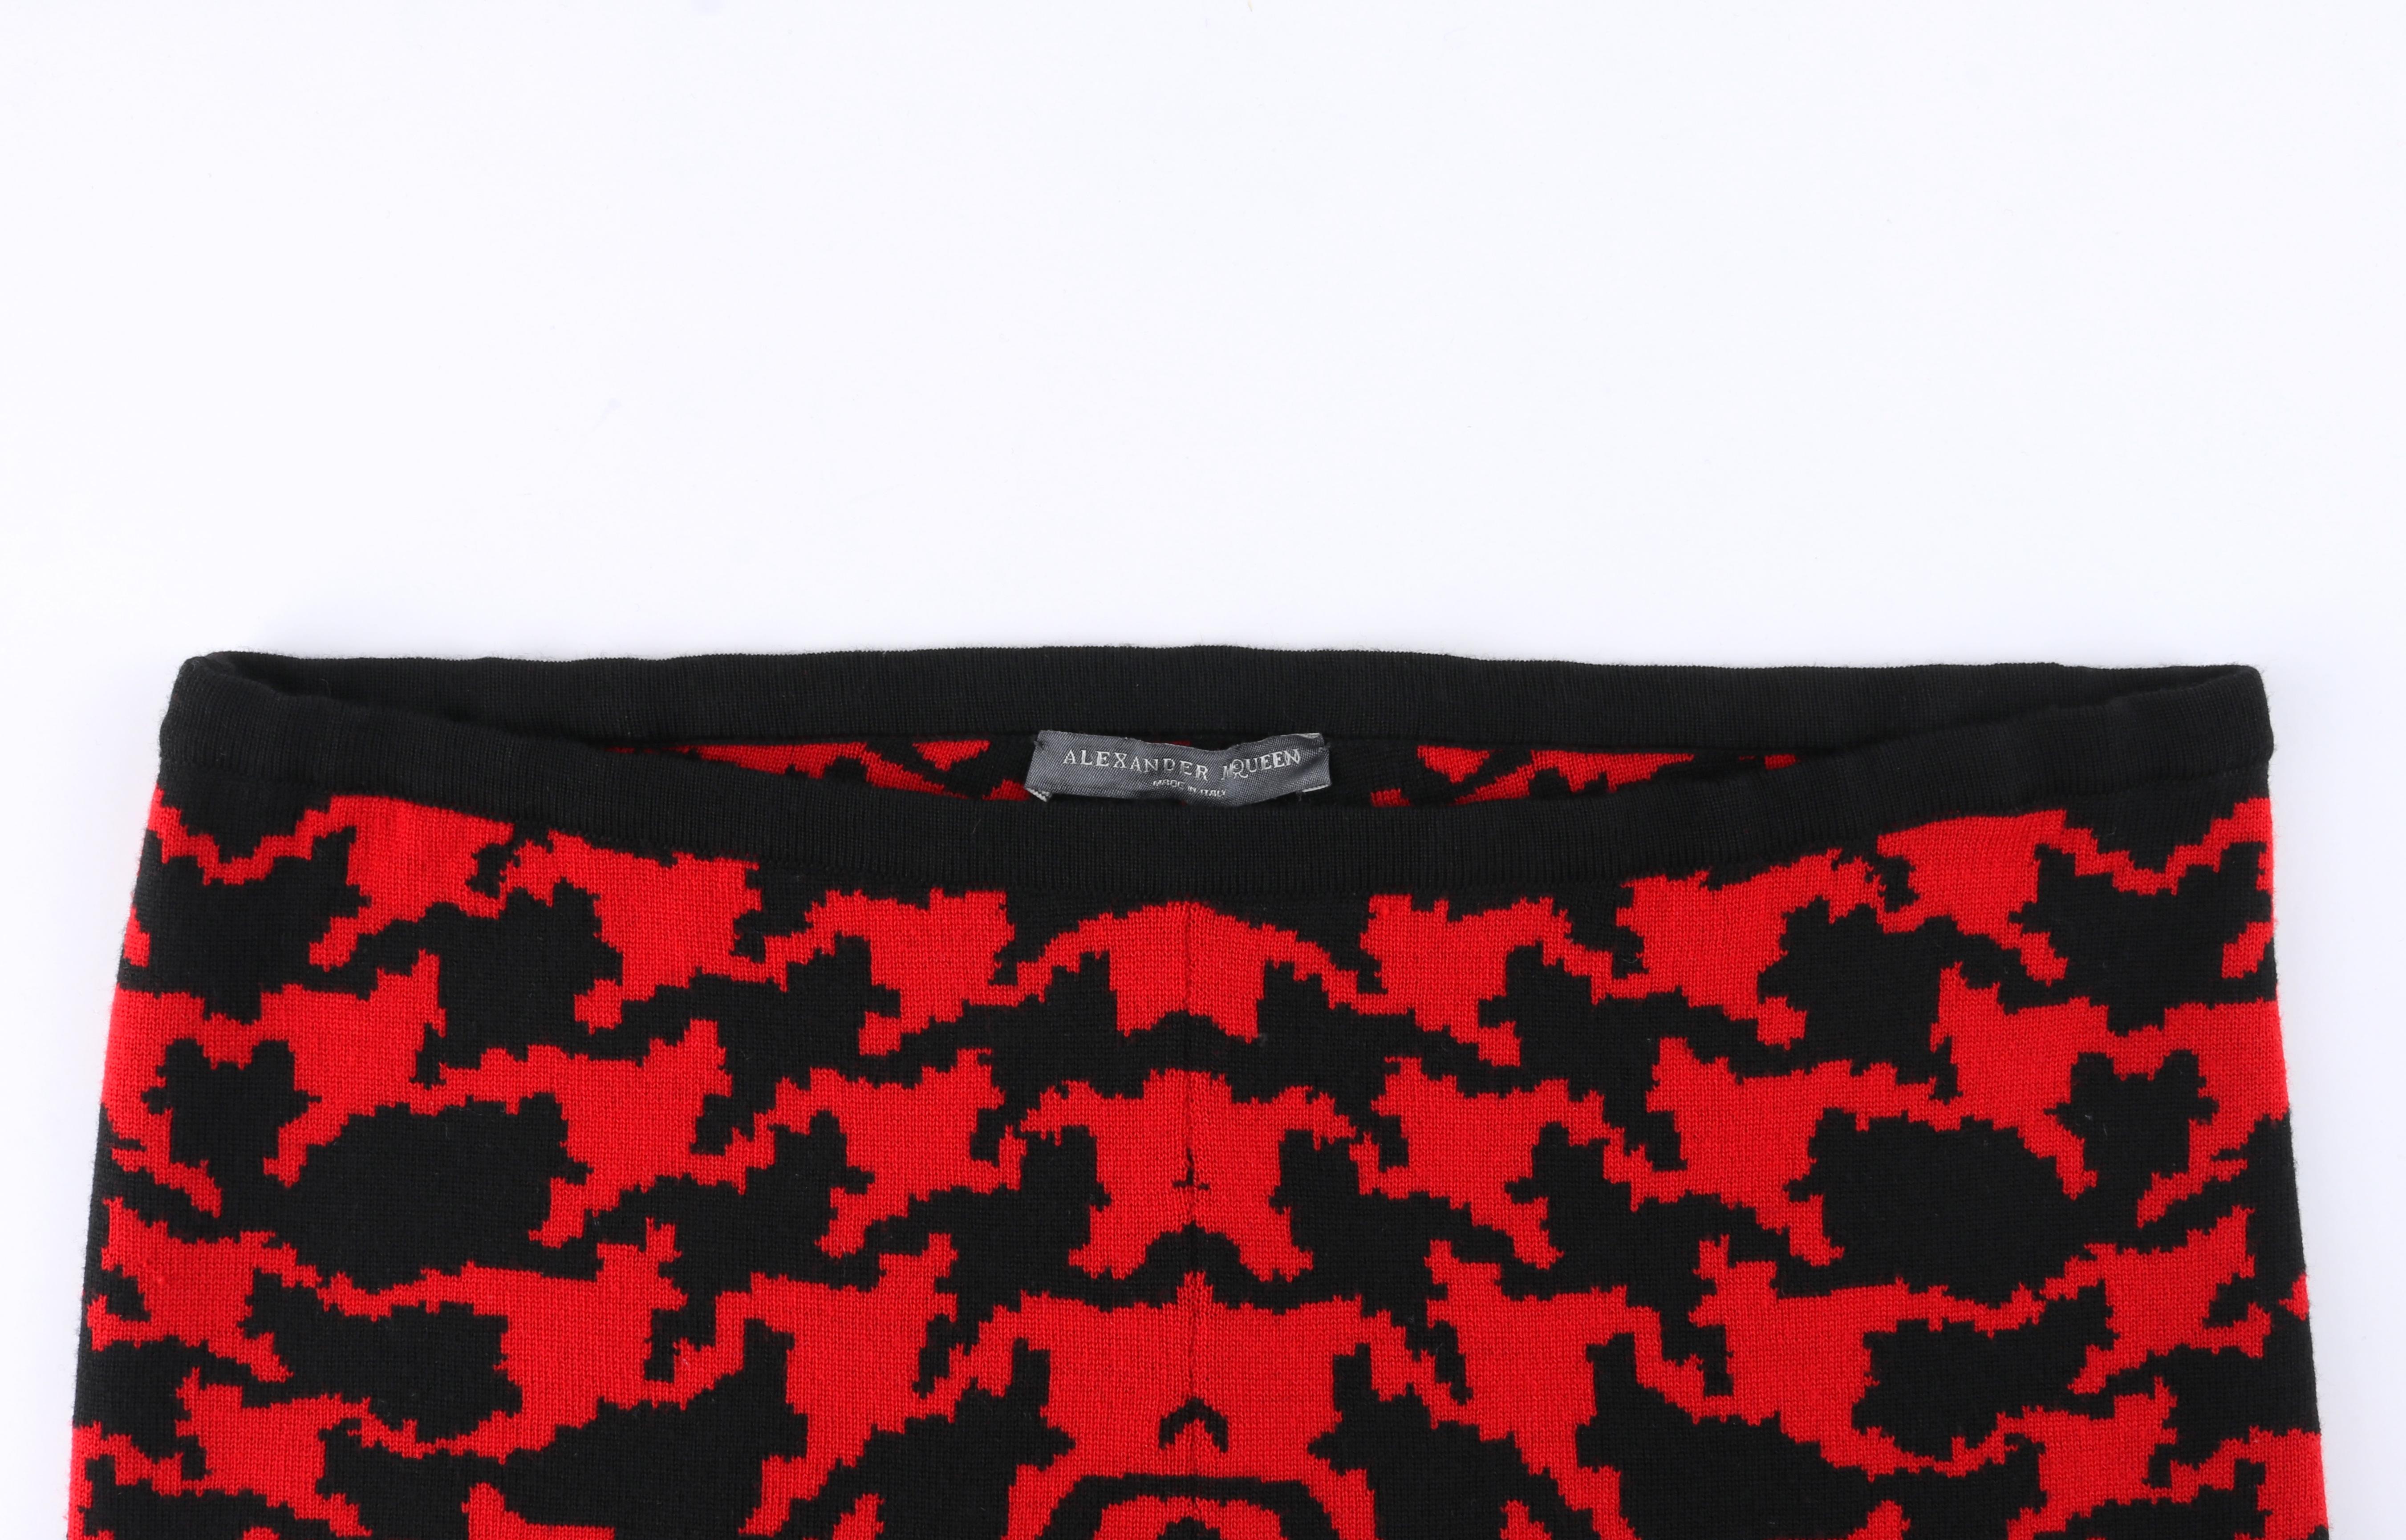 ALEXANDER McQUEEN A/W 2009 “The Horn Of Plenty” Red Houndstooth Knit Leggings XS For Sale 2